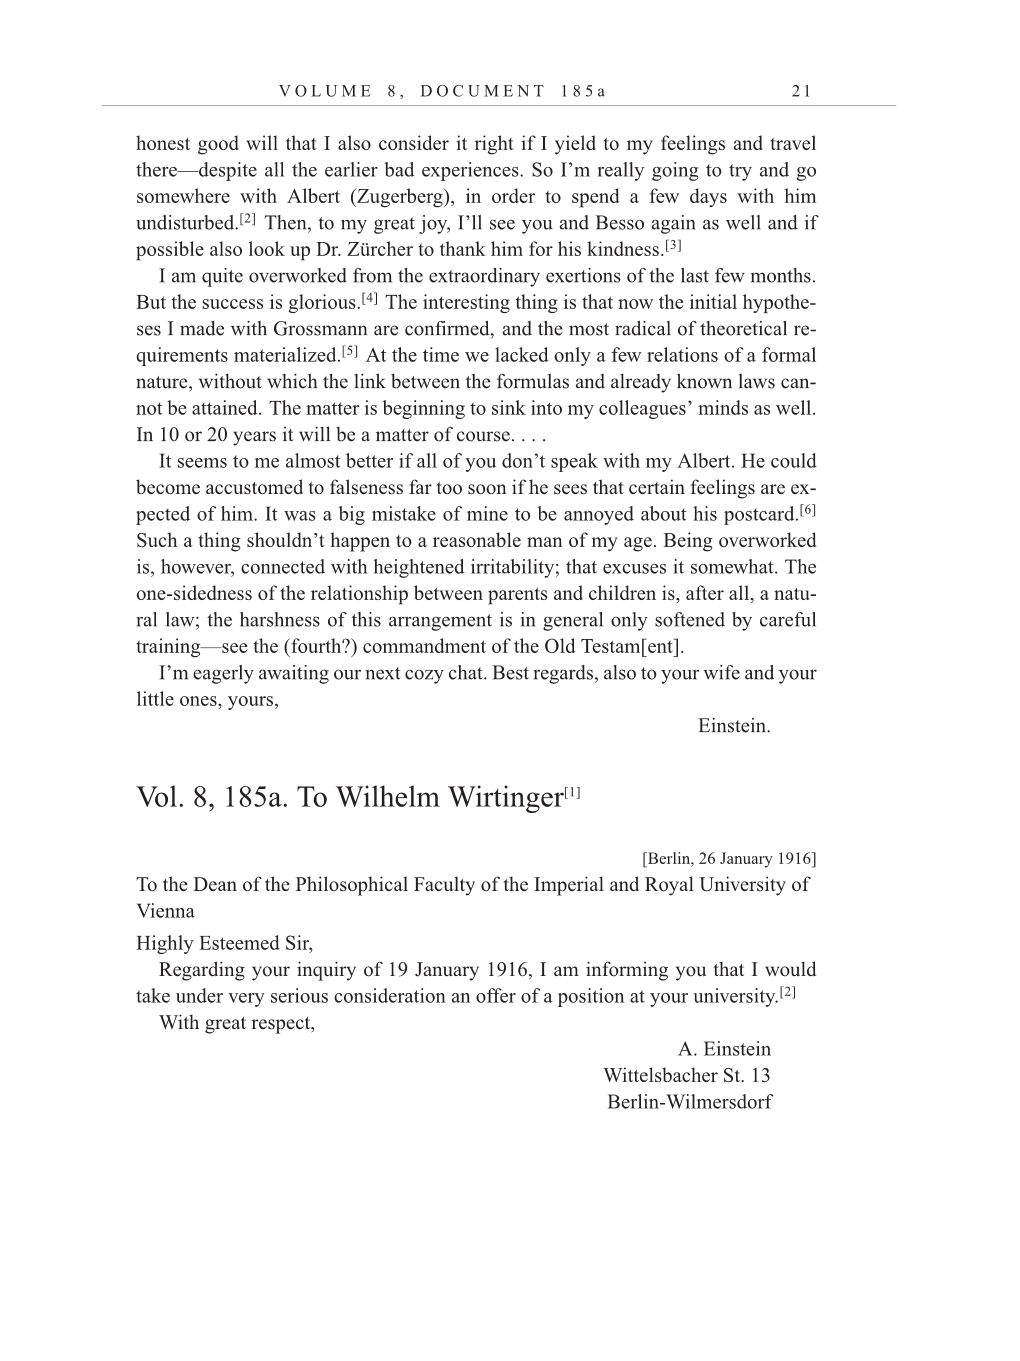 Volume 10: The Berlin Years: Correspondence, May-December 1920, and Supplementary Correspondence, 1909-1920 (English translation supplement) page 21